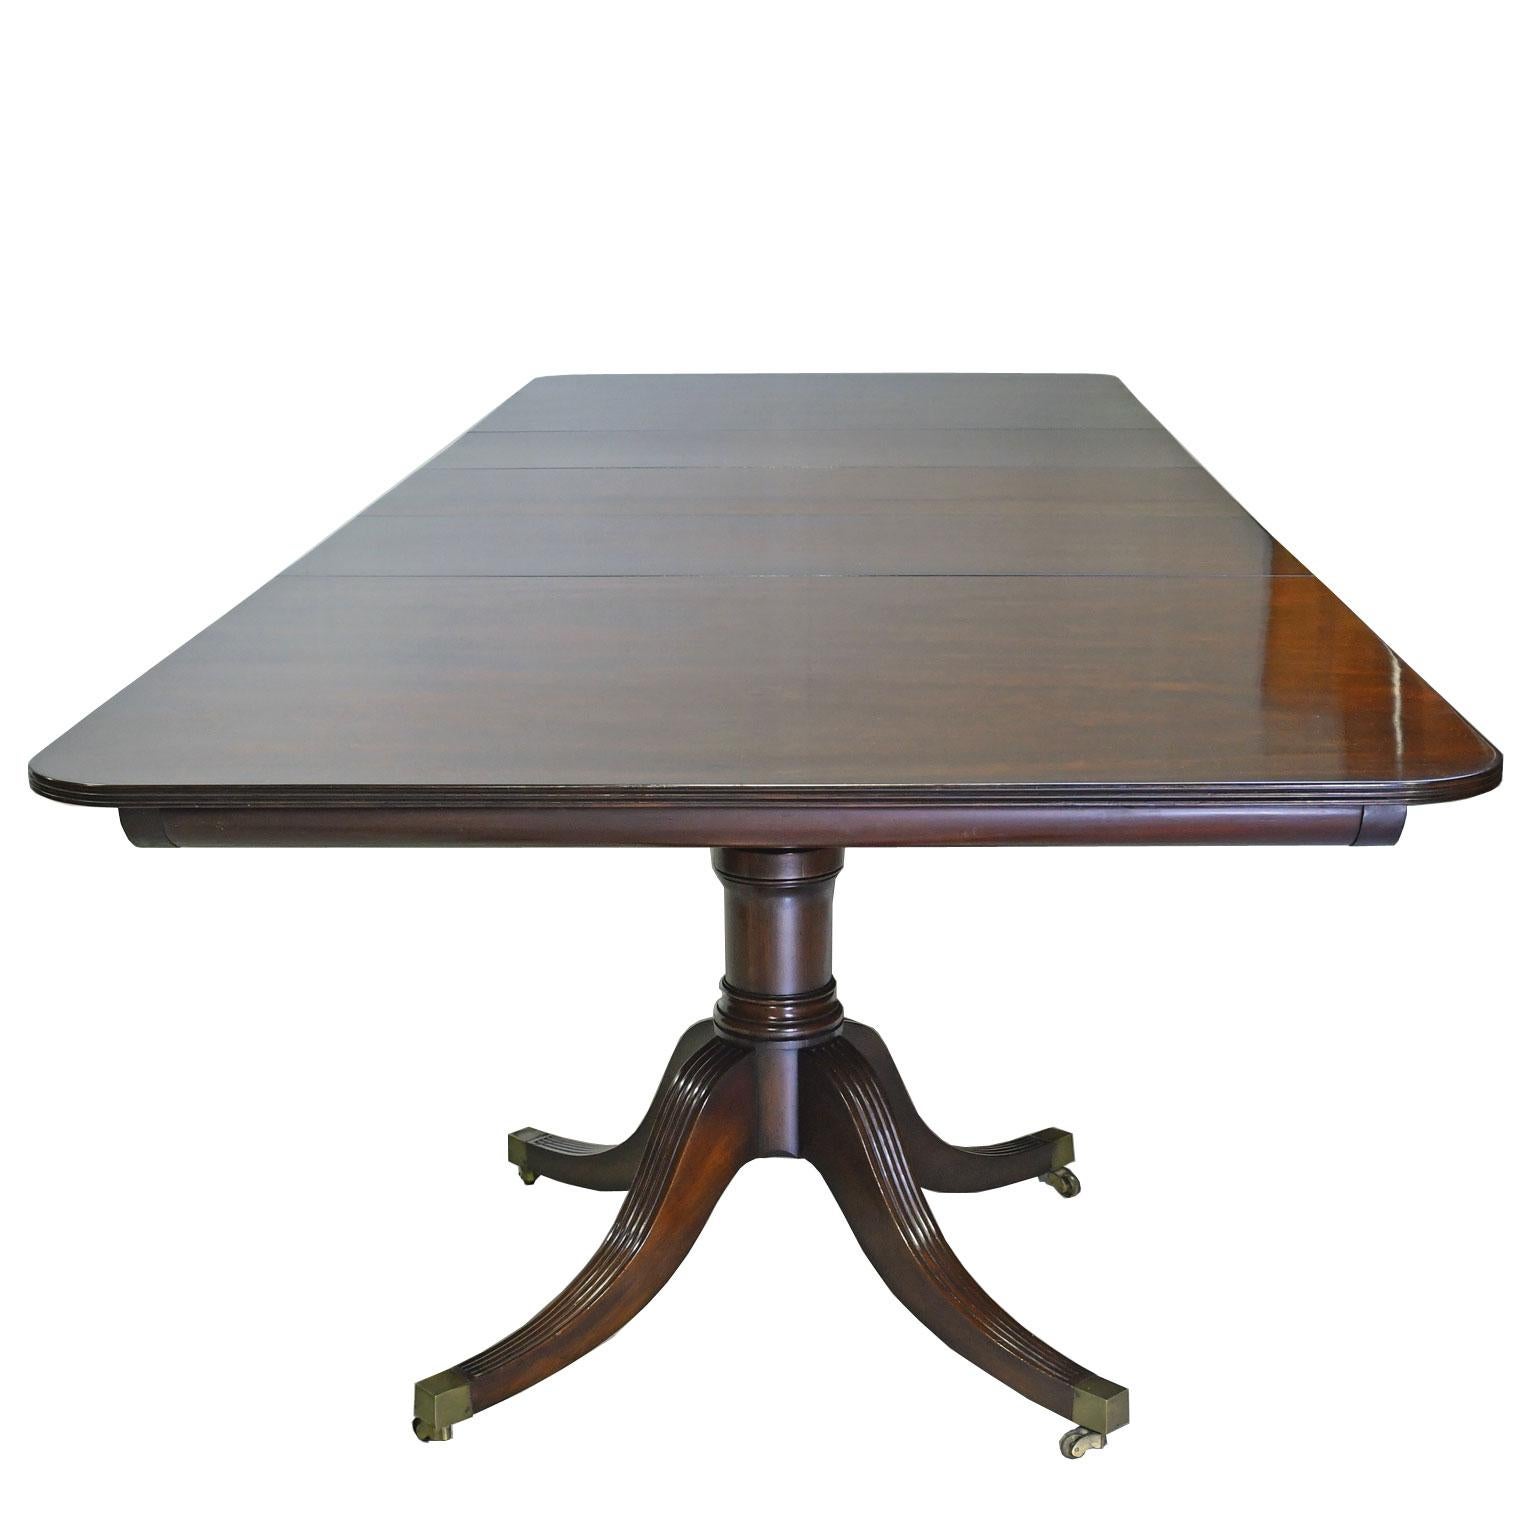 20th Century 12' Hepplewhite-Style Dining Table Mahogany, 2 Pedestals, 3 Leaves, circa 1945